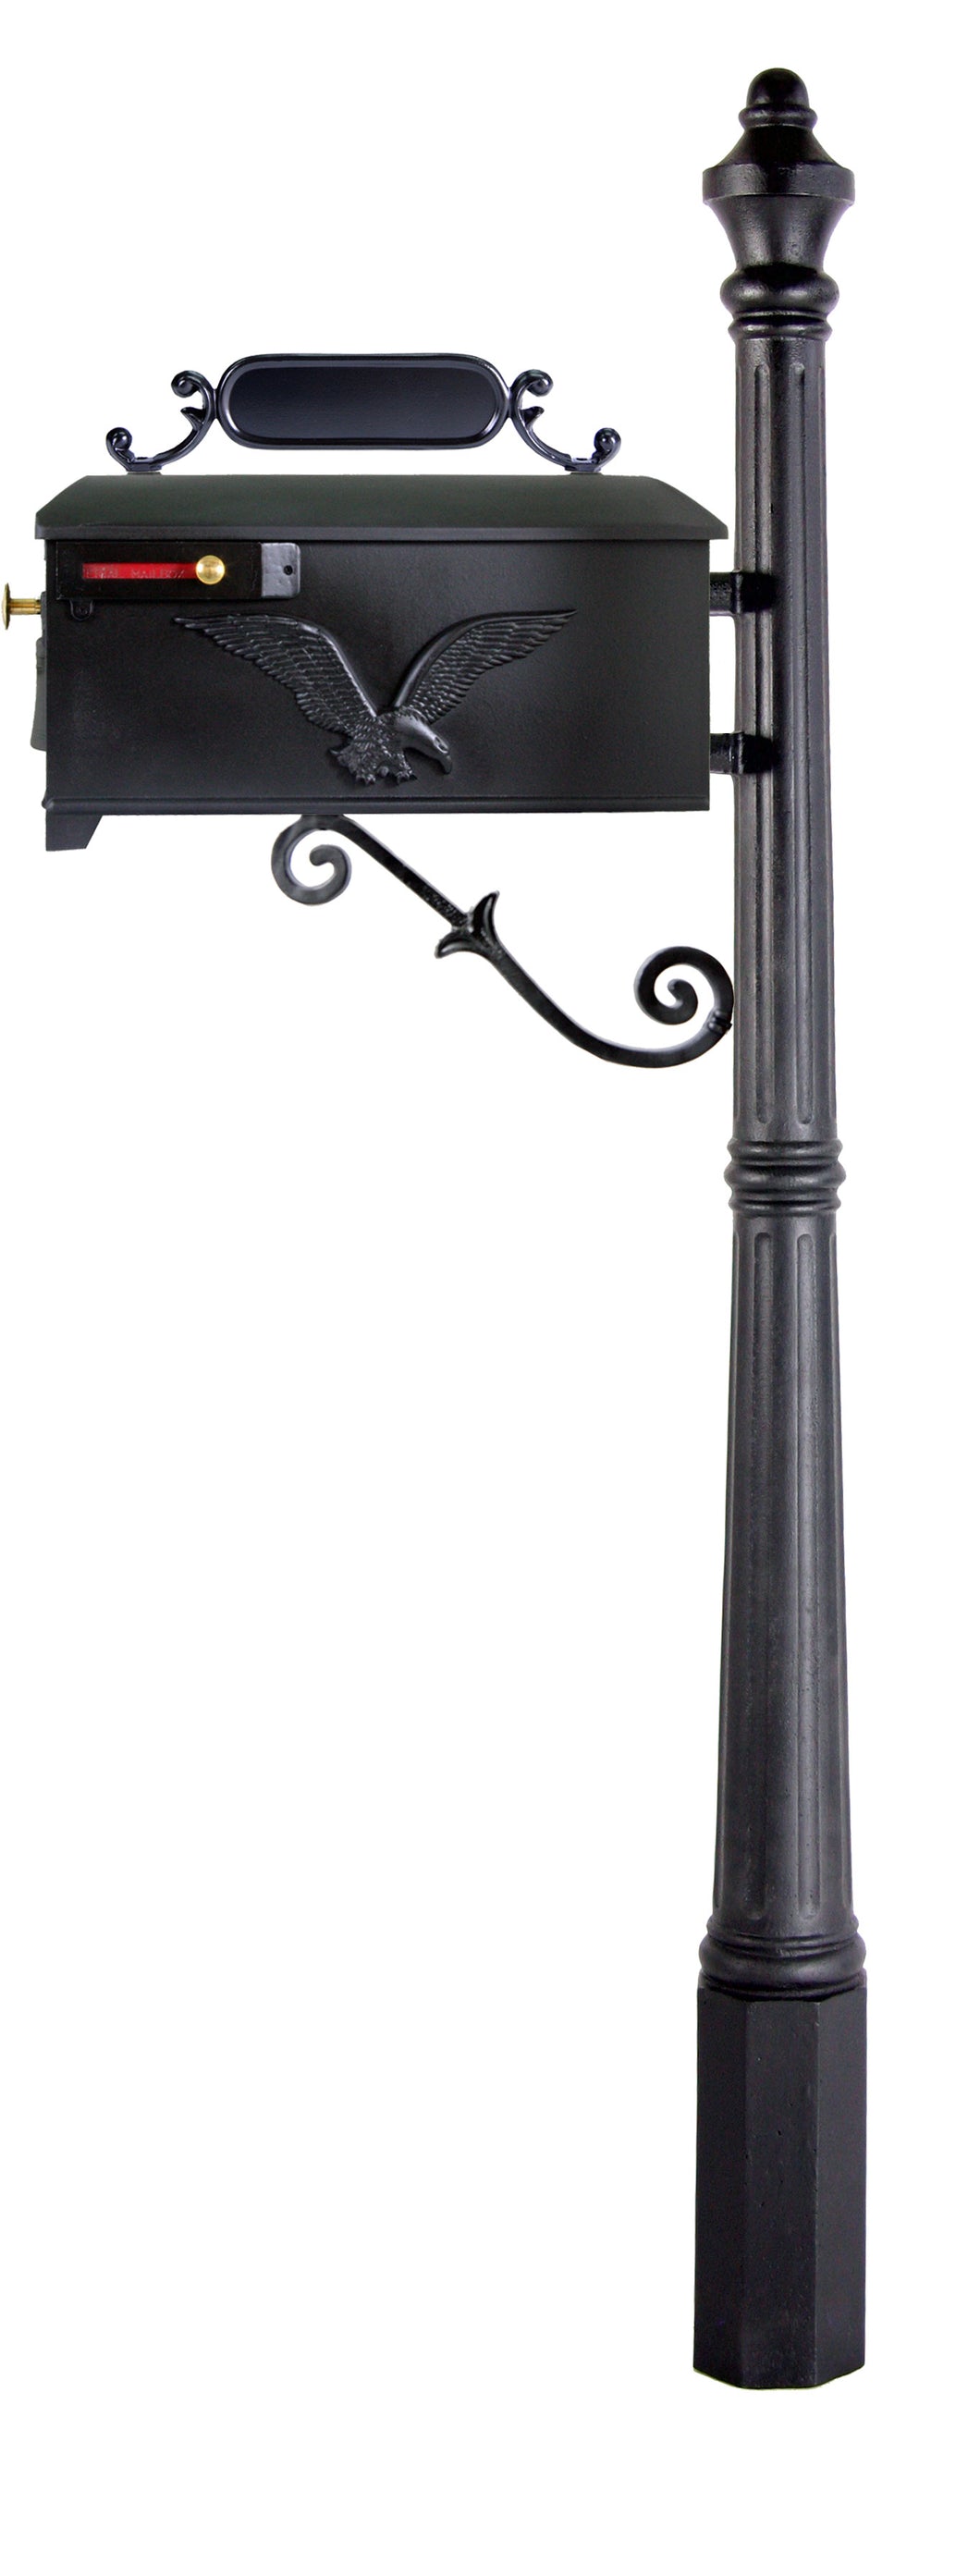 Black imperial Eagle and Bell Mailbox. Simple fluted post, number plate and side red flag.